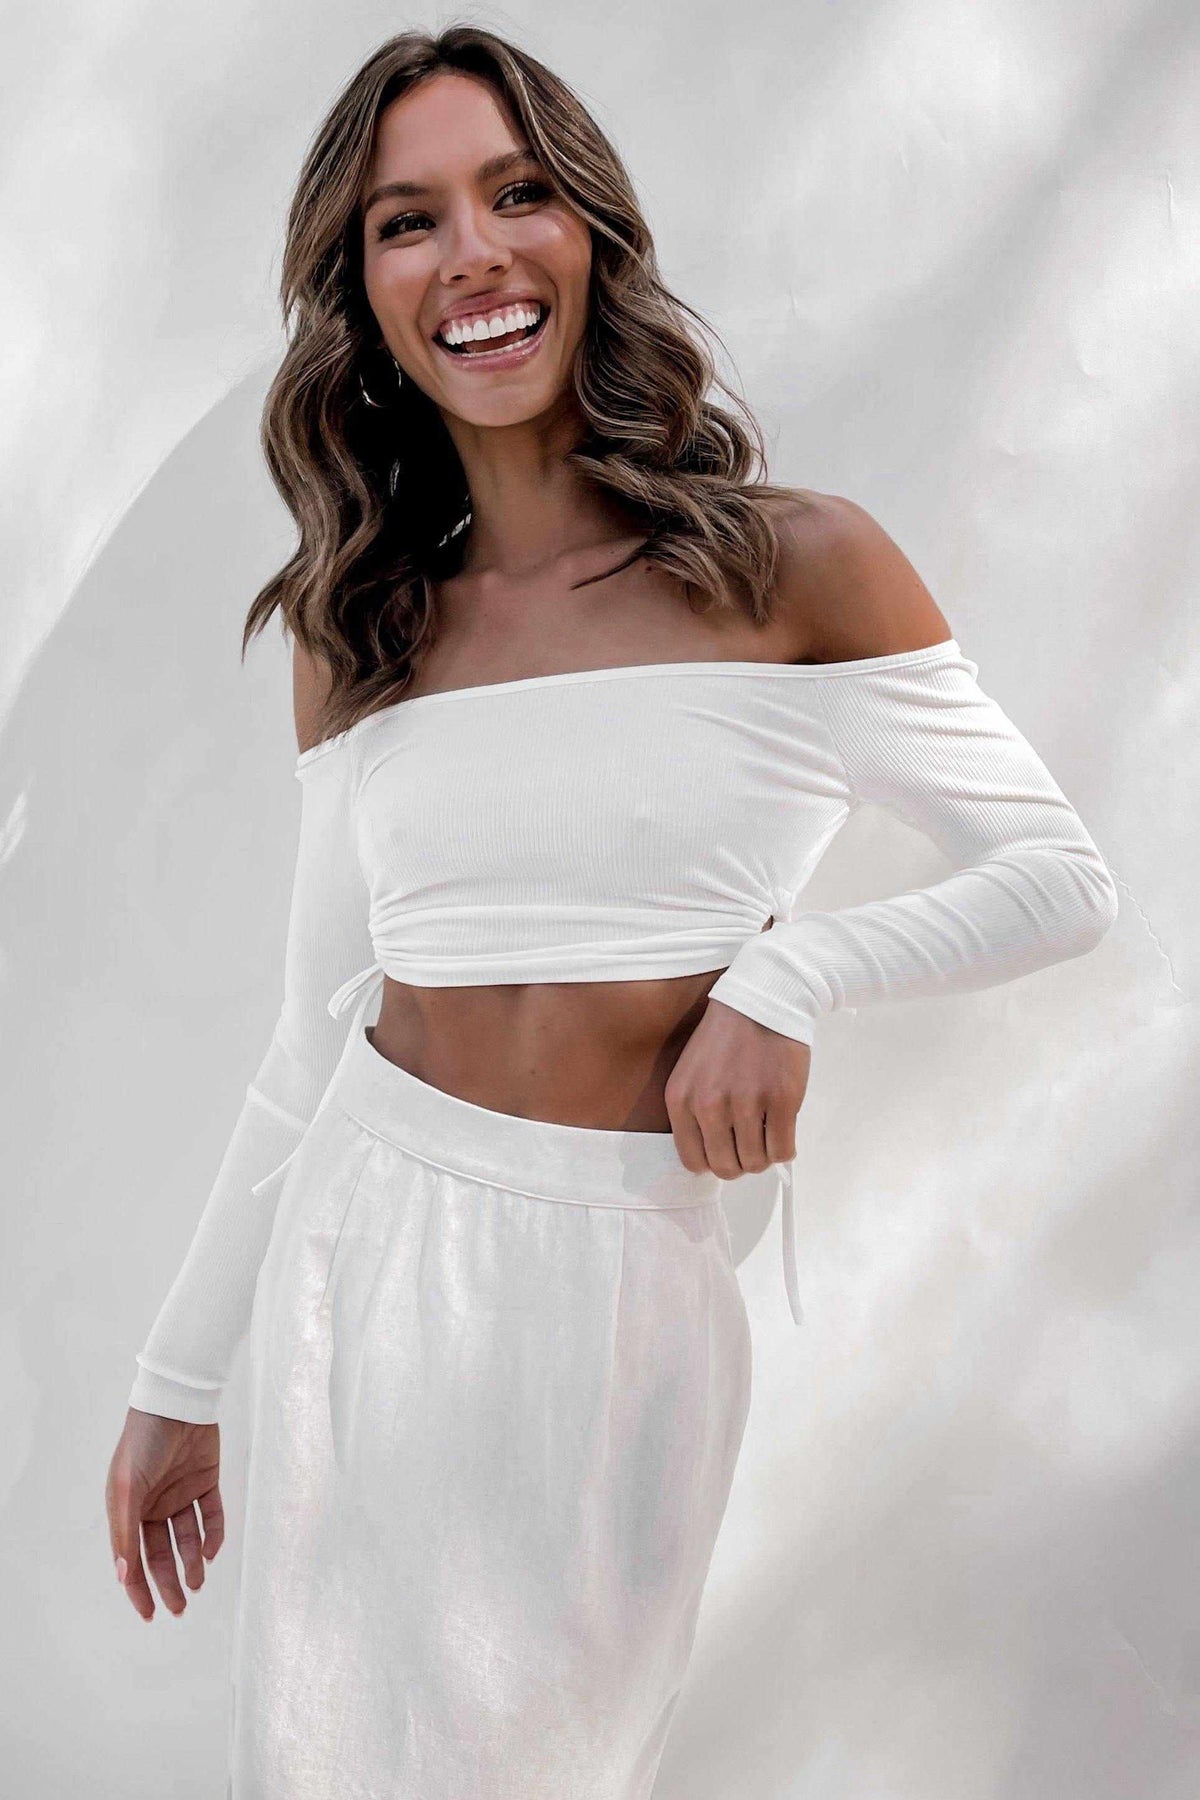 Waverly Top, COTTON &amp; SPANDEX, COTTON AND SPANDEX, CROP TOPS, LONG SLEEVE, Sale, SPANDEX &amp; COTTON, SPANDEX AND COTTON, TOP, TOPS, WHITE, Our New Waverly Top Is Now Only $51.00 Exclusive At Mishkah, Our New Waverly Top is now only $51.00-We Have The Latest Women&#39;s Tops @ Mishkah Online Fashion Boutique-MISHKAH